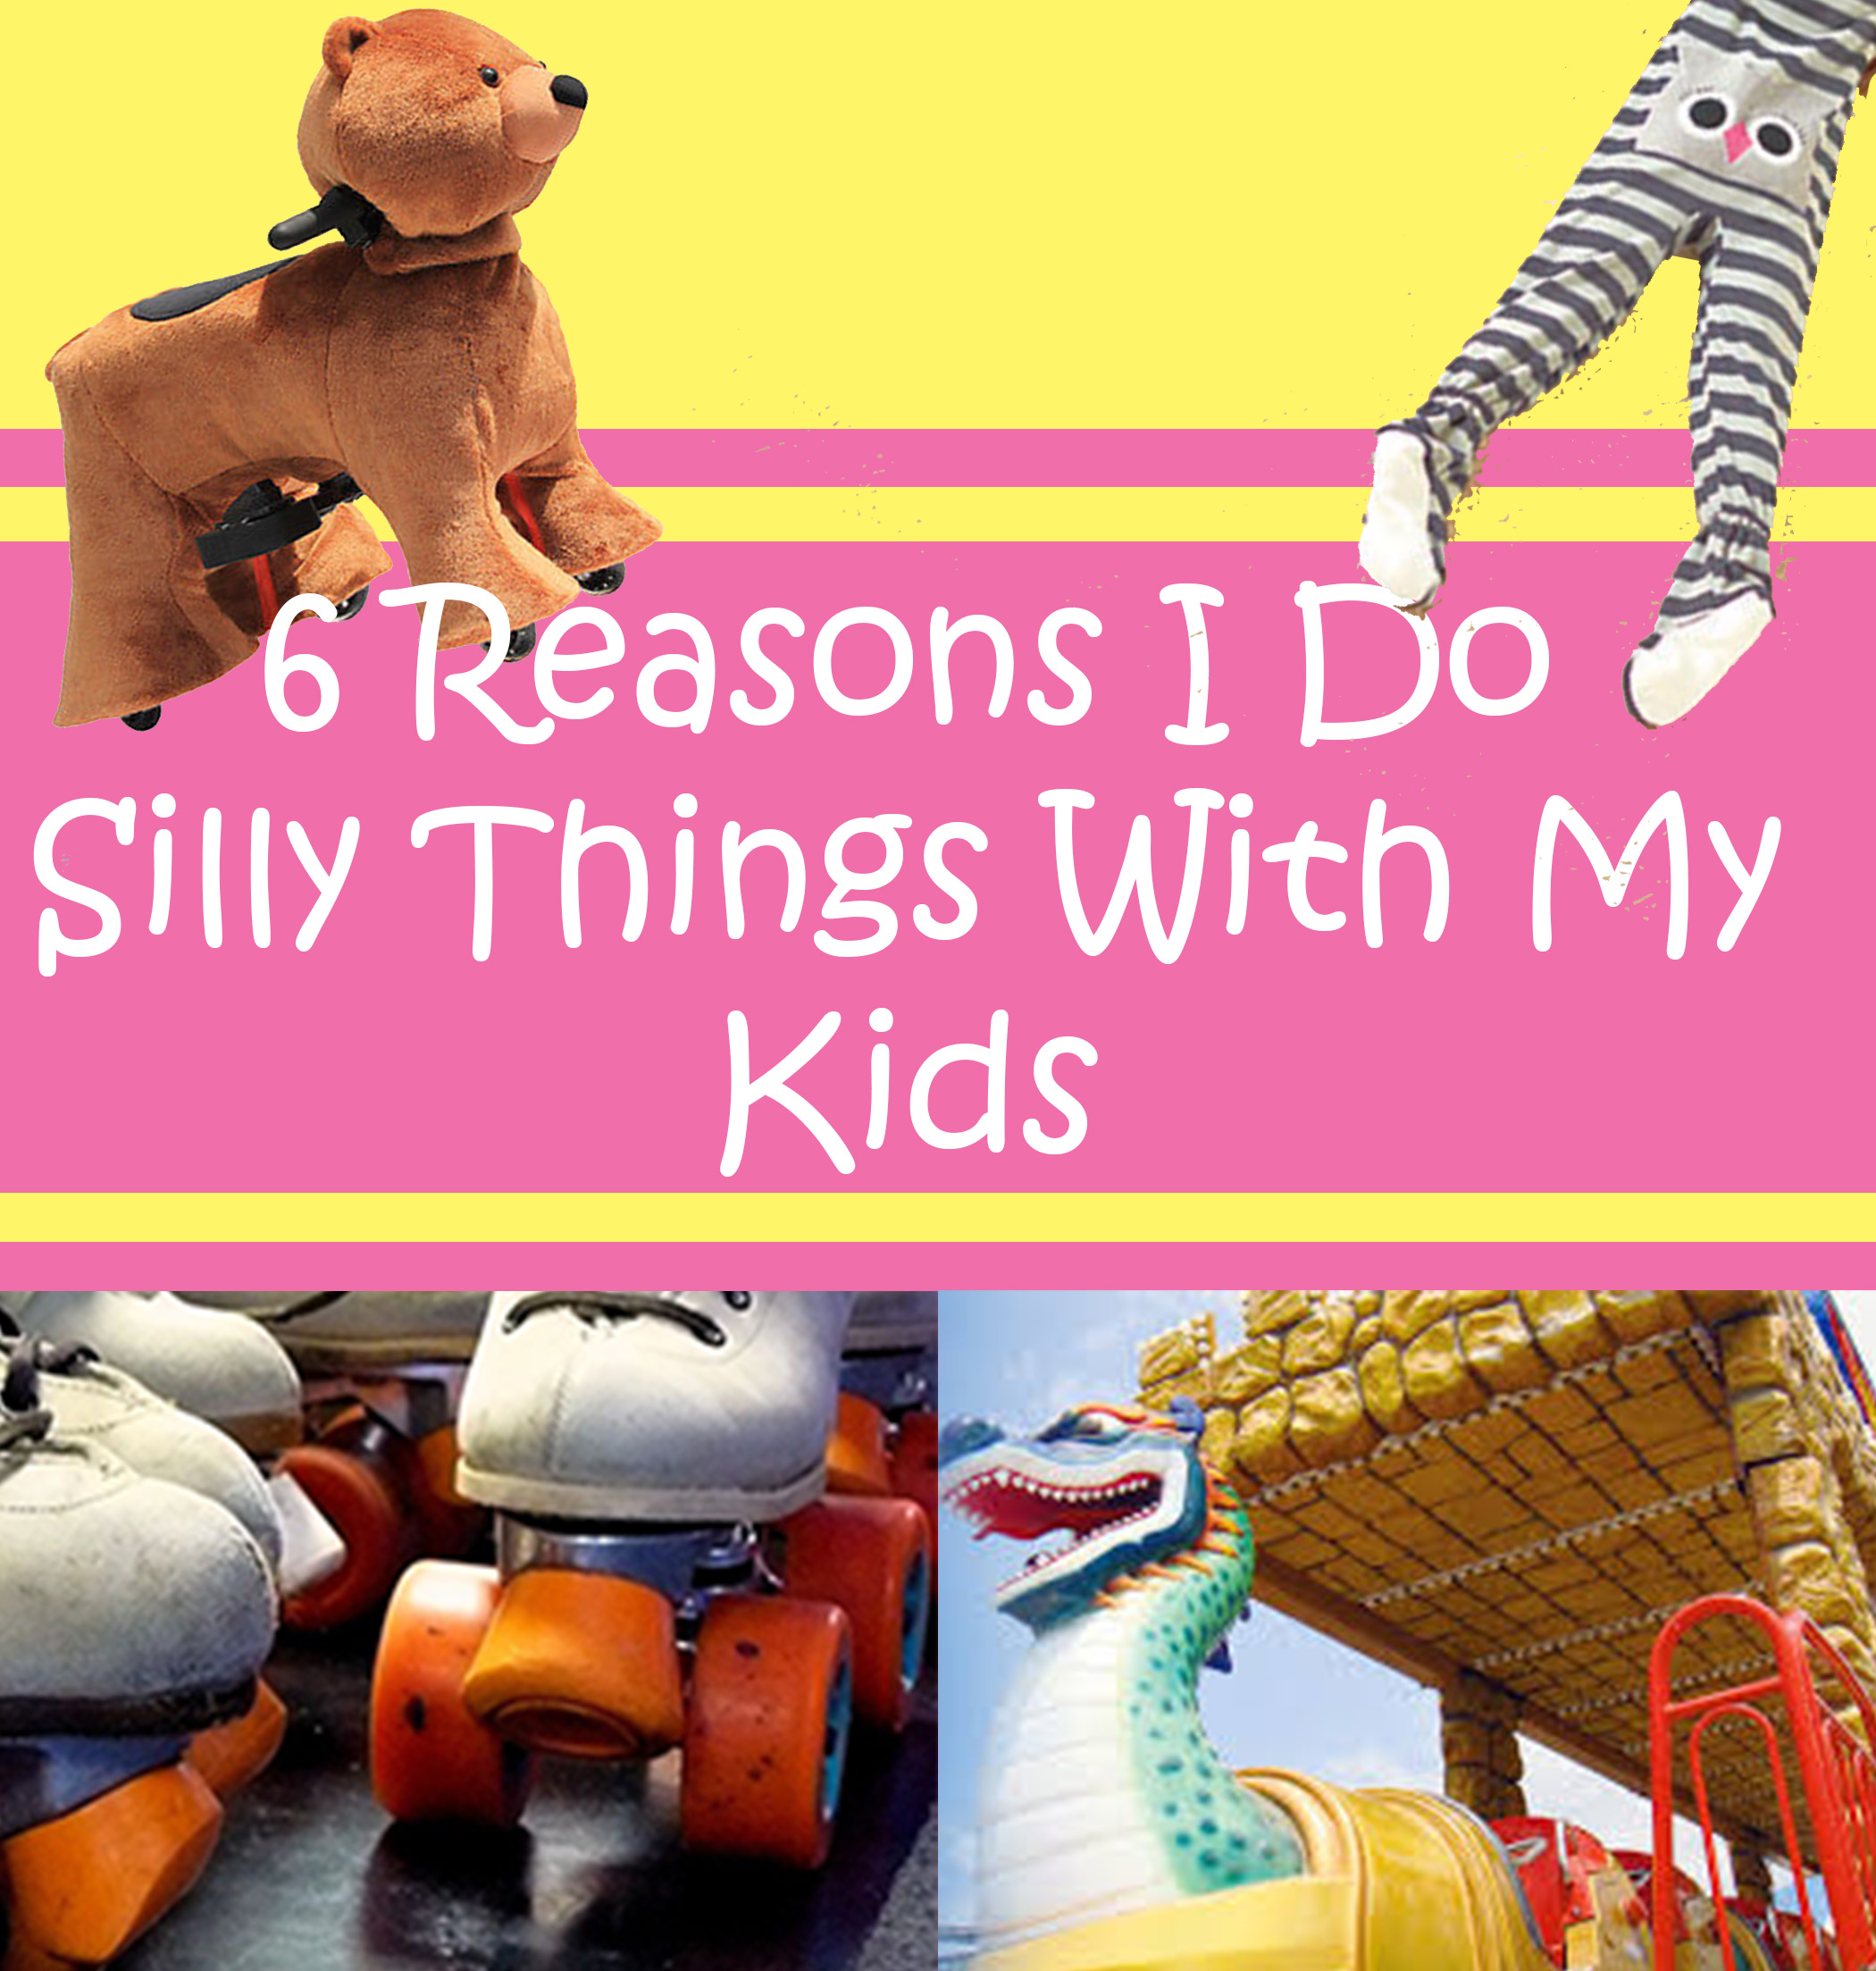 6 reasons I do silly things with my kids